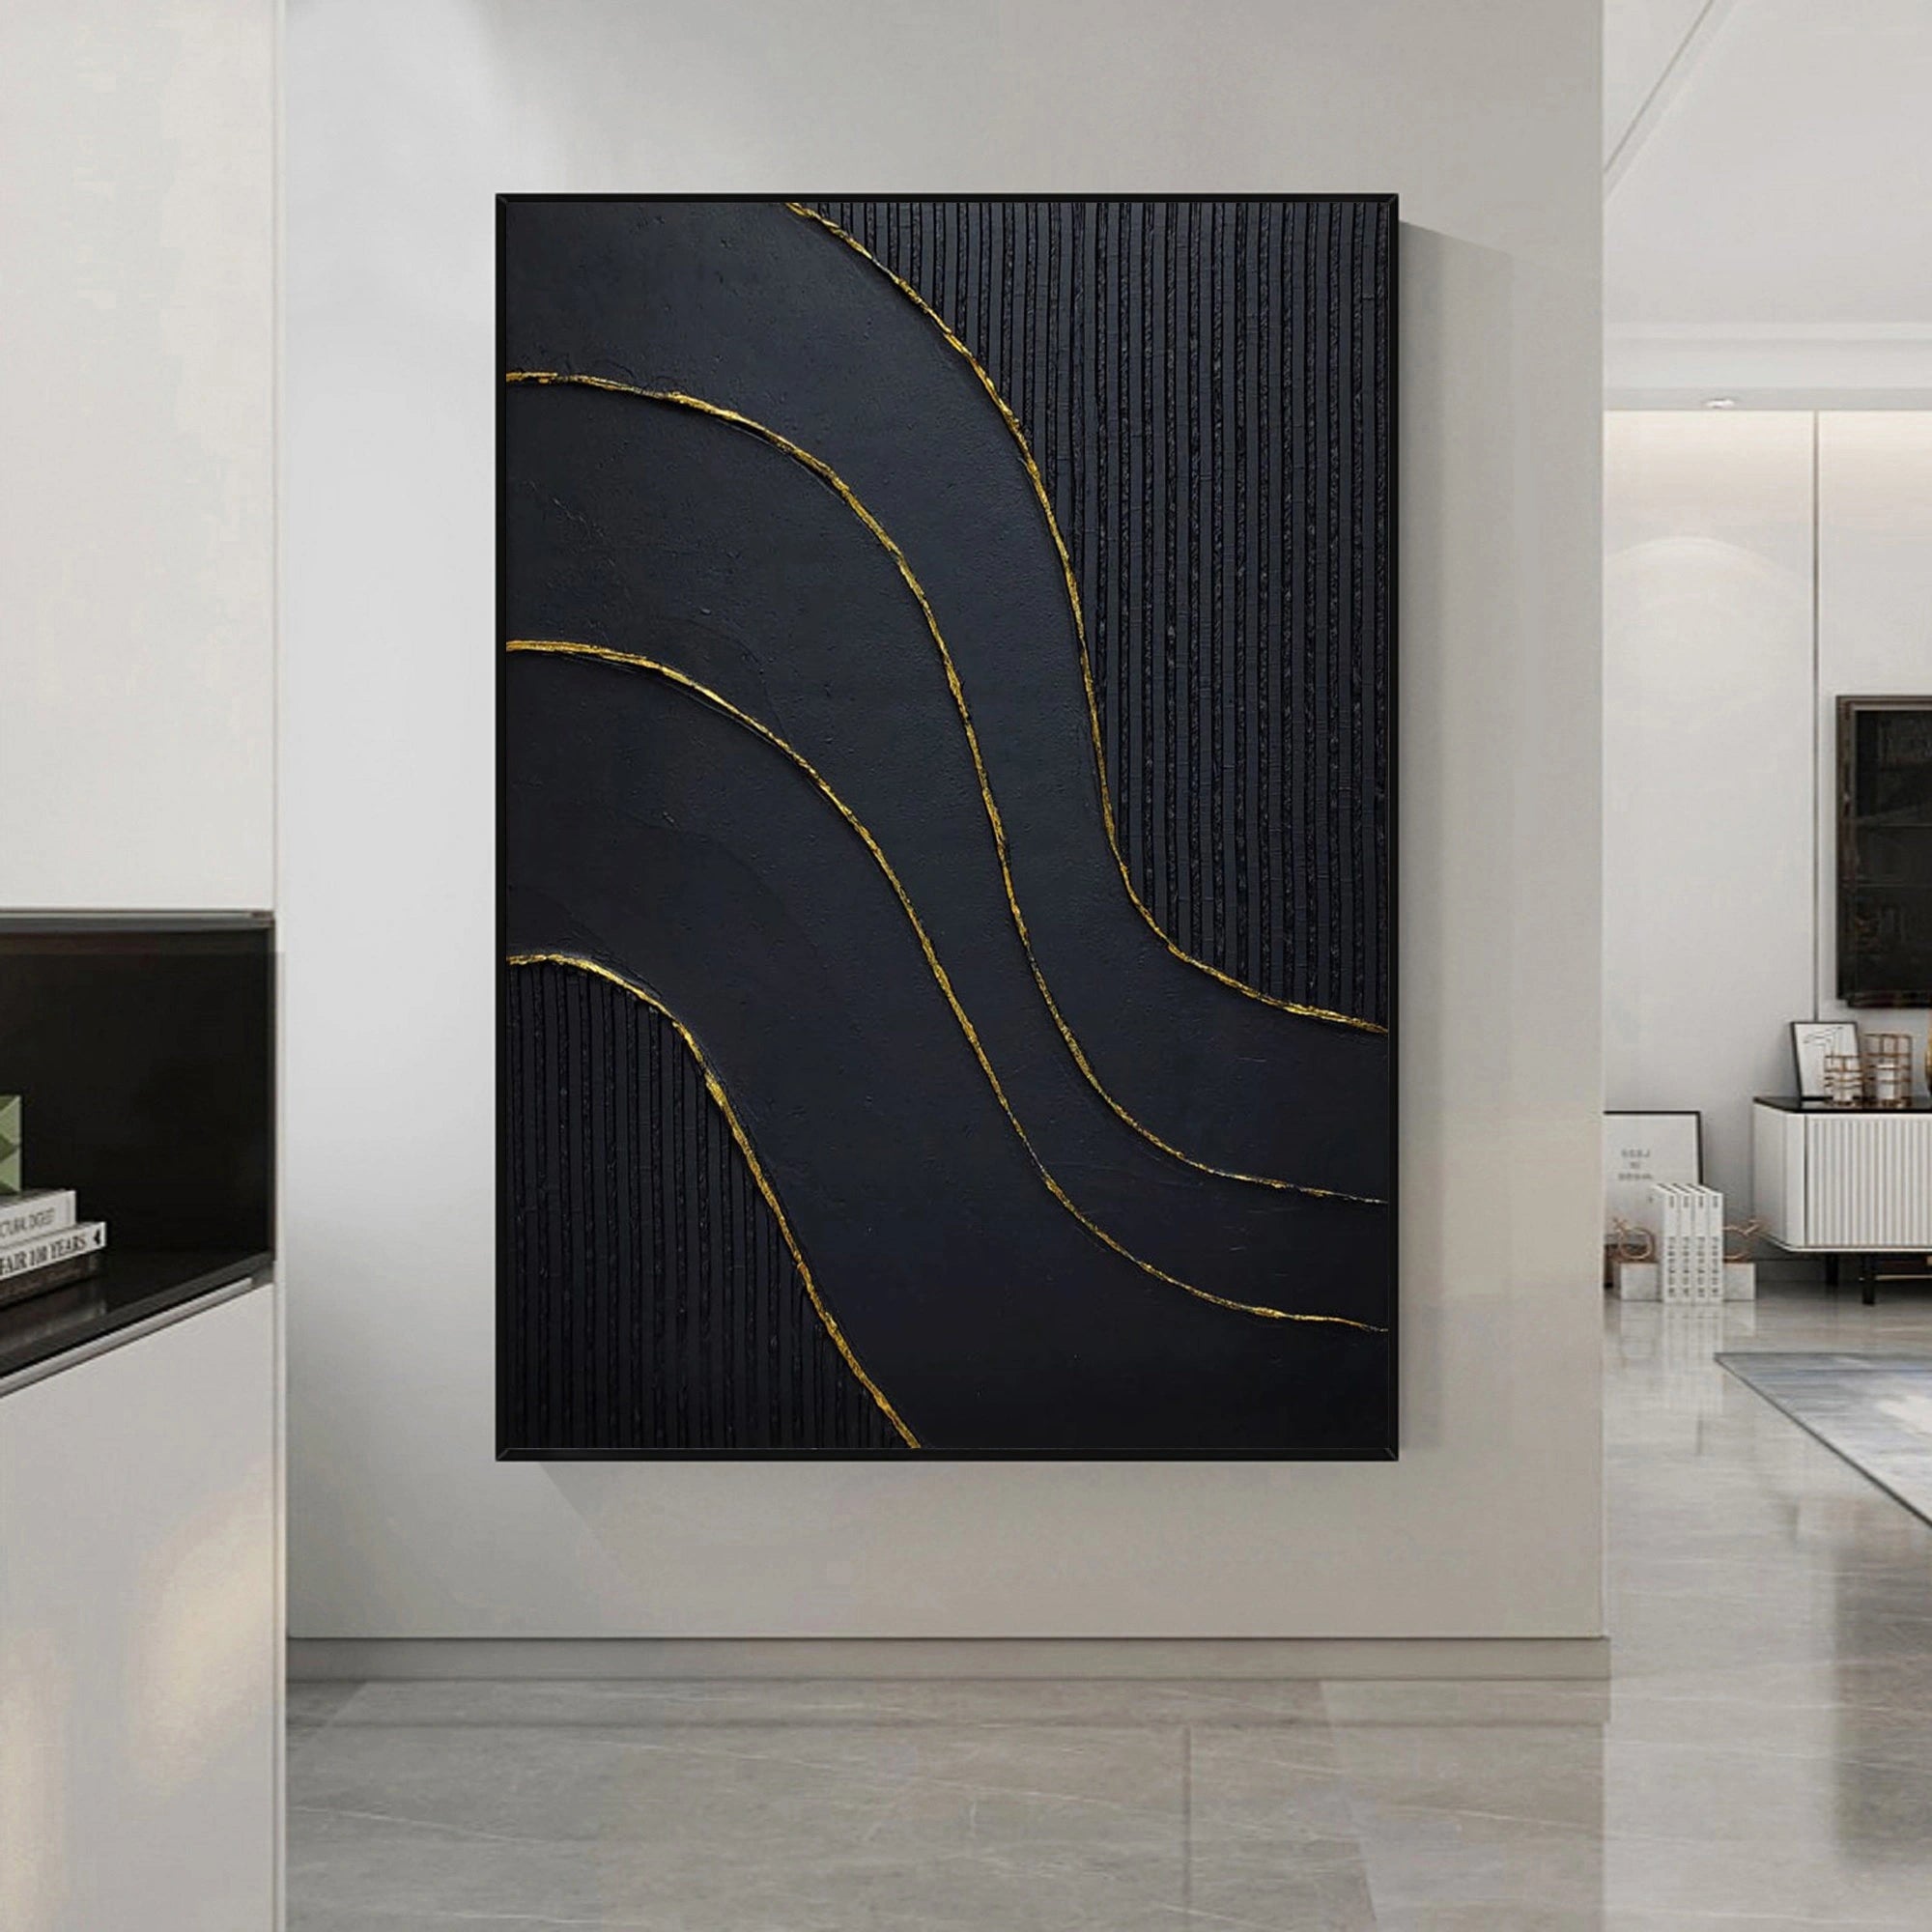 Large 3D Textured Abstract Minimalist Wall Art Black Modernism Painting Gold Foil Handcrafted Artwork Home Decor